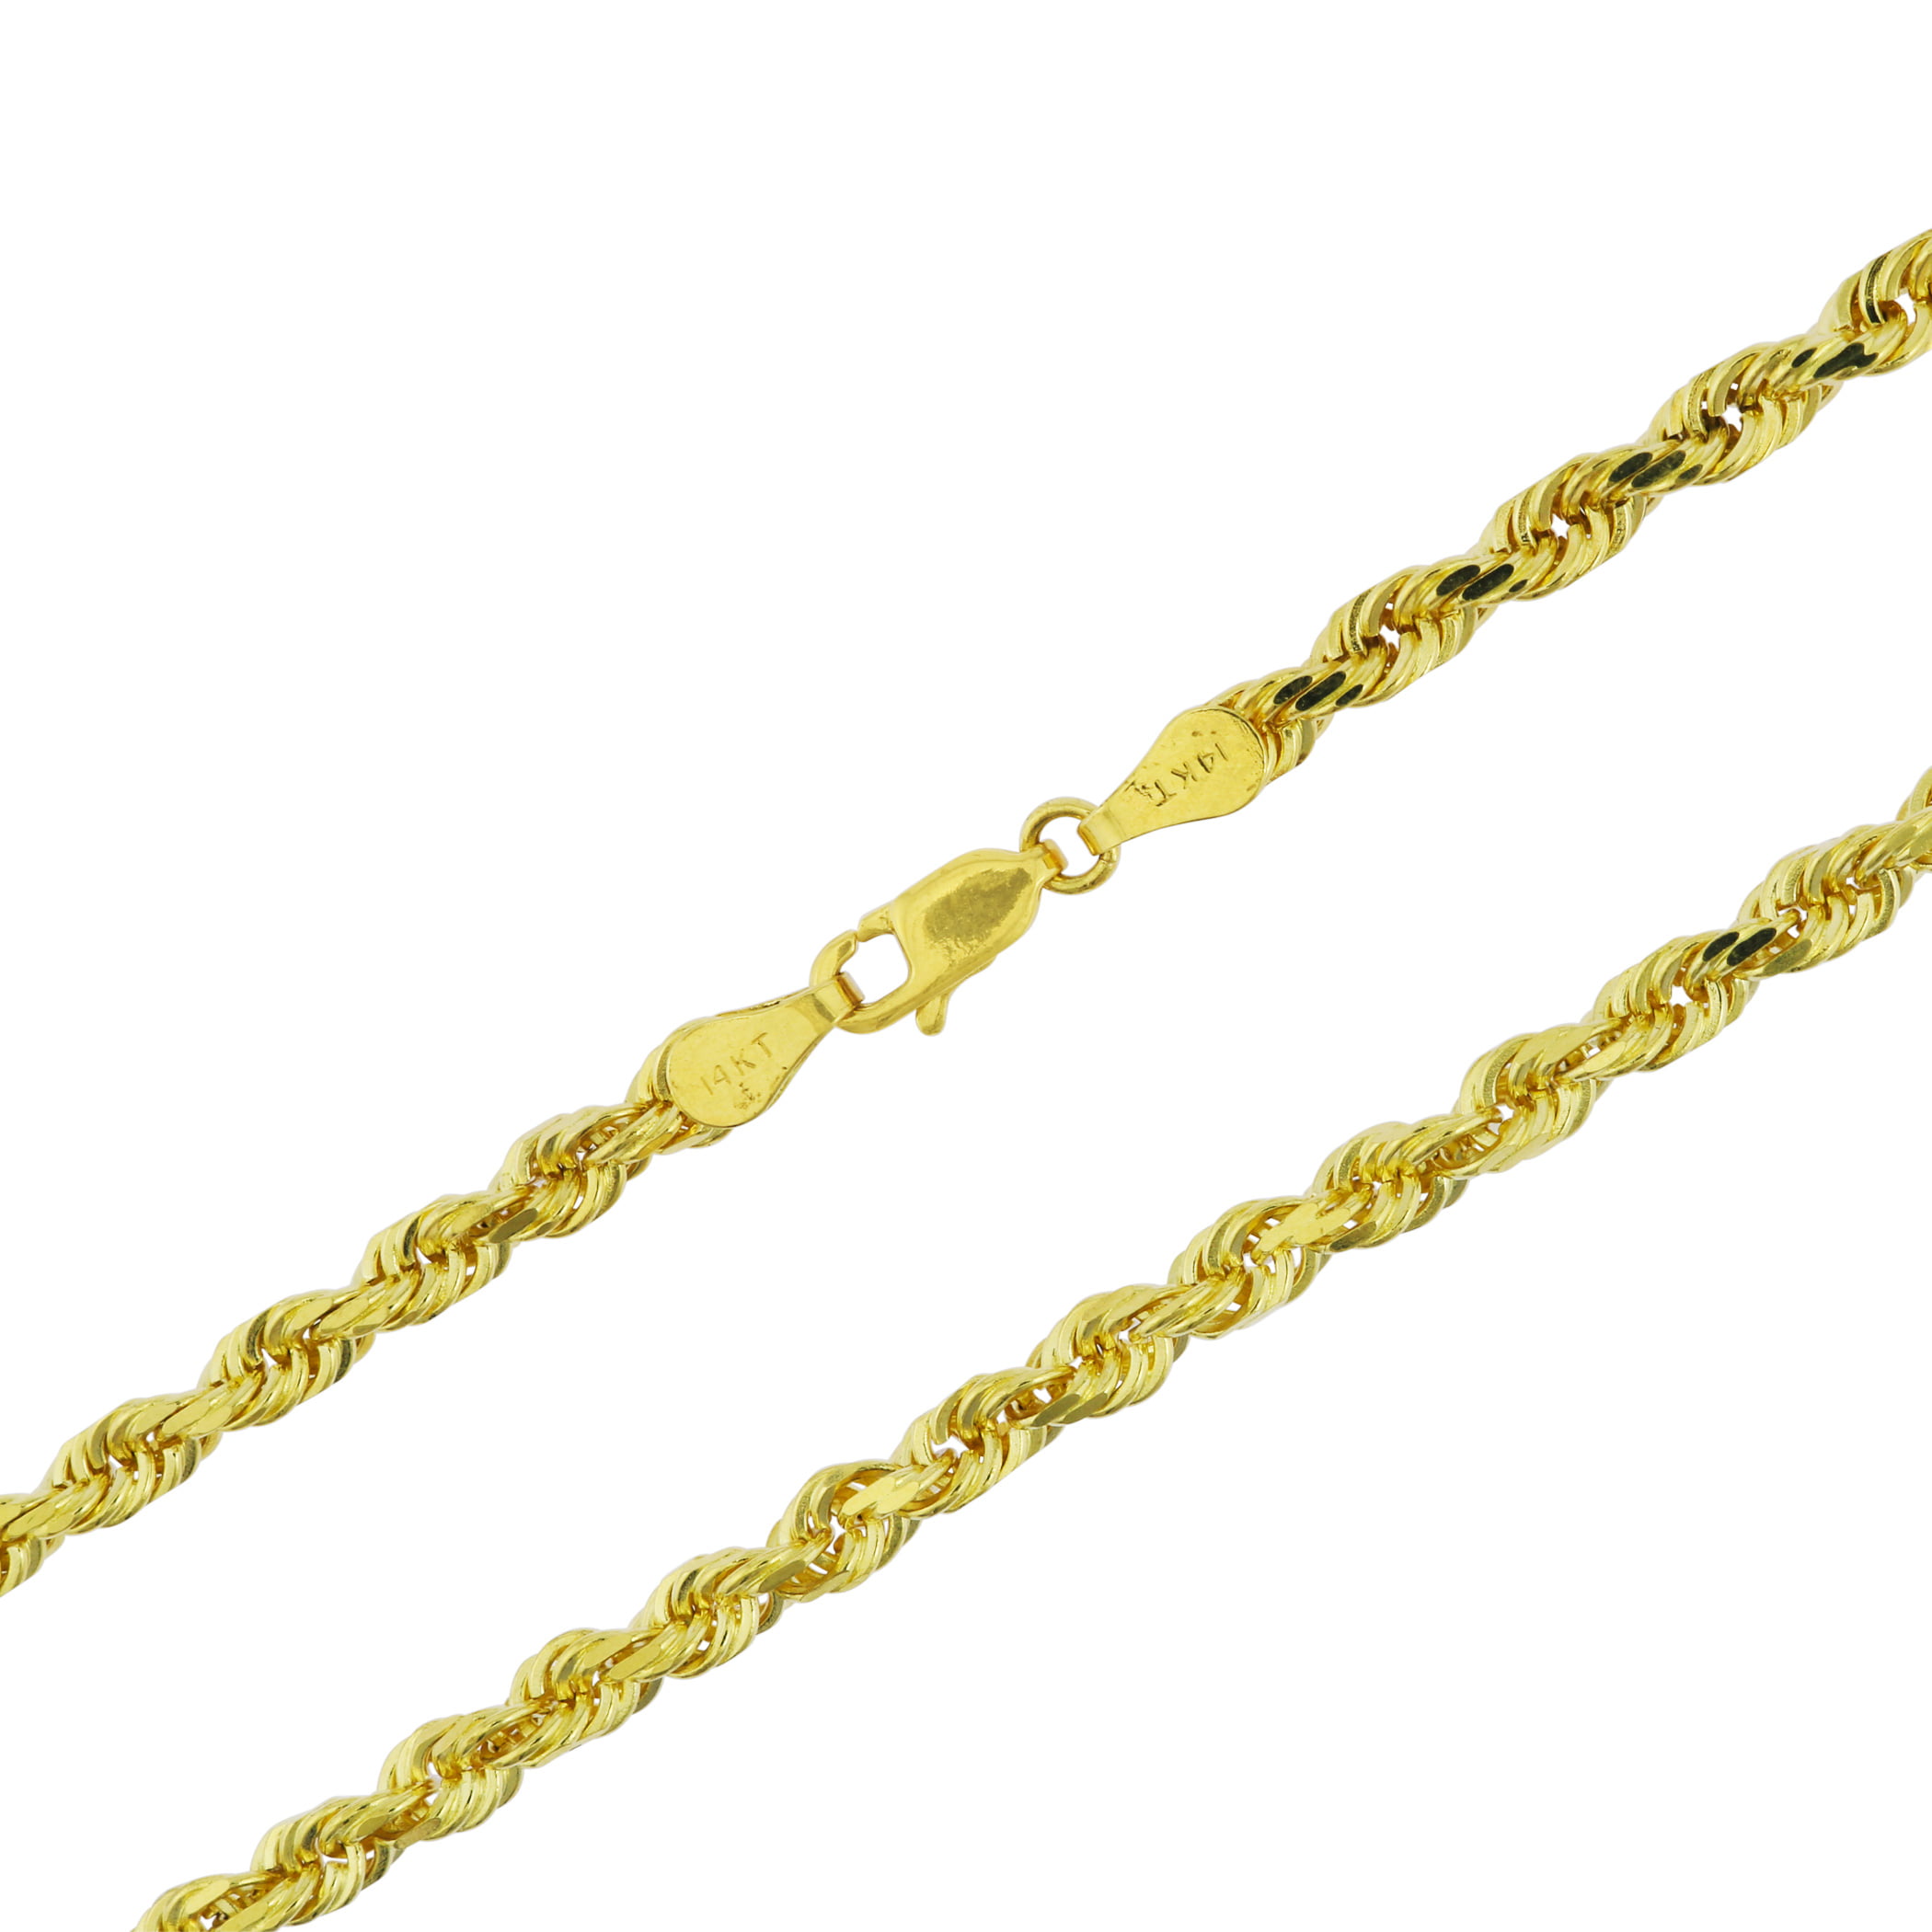 Gold Chain Rope Necklace Yellow 16-30 Solid 14k 4mm Men Women Diamond Cut Rope 